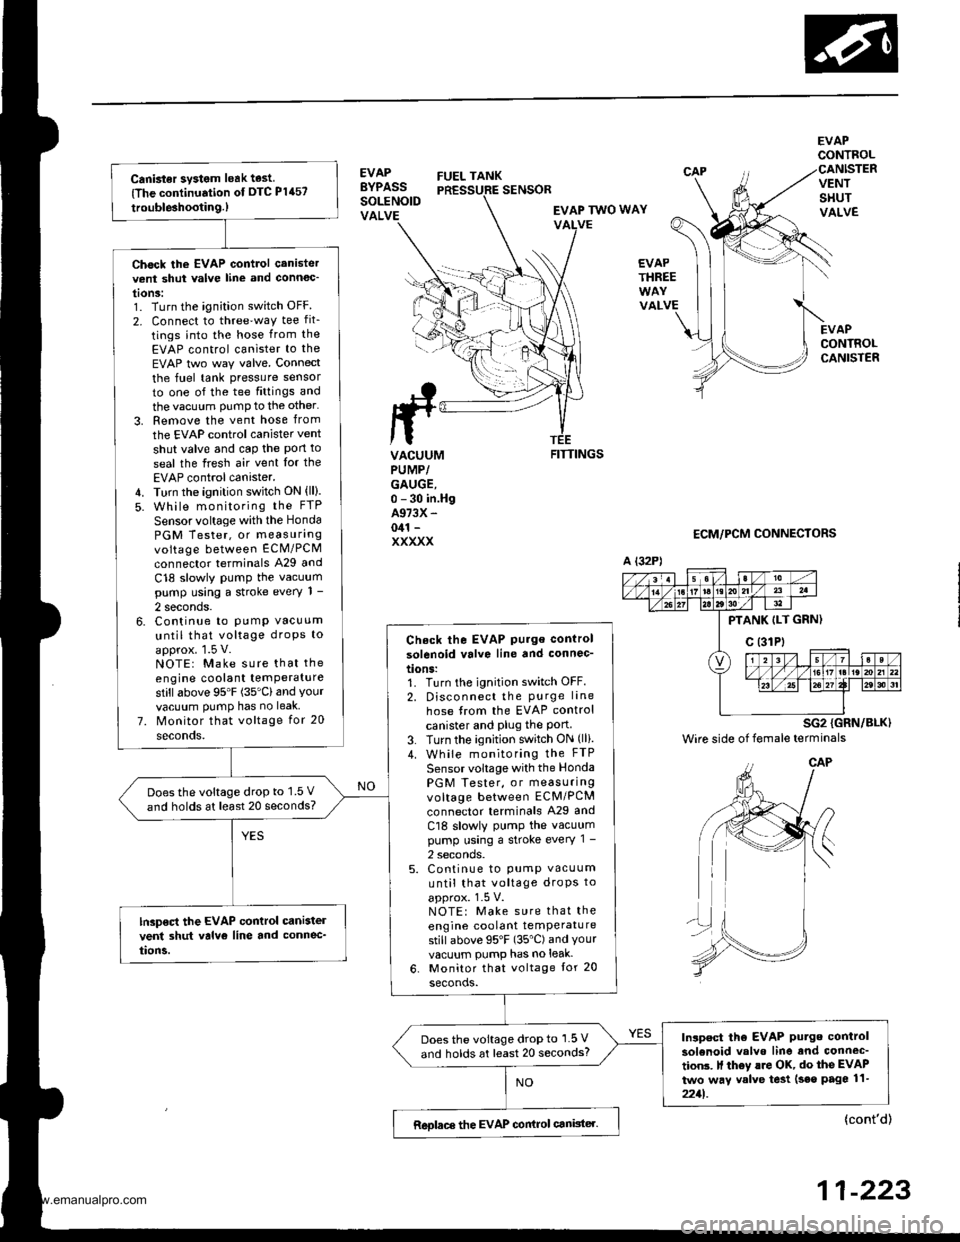 HONDA CR-V 2000 RD1-RD3 / 1.G Service Manual 
Canbter system leak test
{The continuation of DTC P1457
trouble3hootin9.)
Chock the EVAP control canistervent shut valve line and connoc
tonS:1. Turn the ignition switch OFF
2. Connect to threeway 